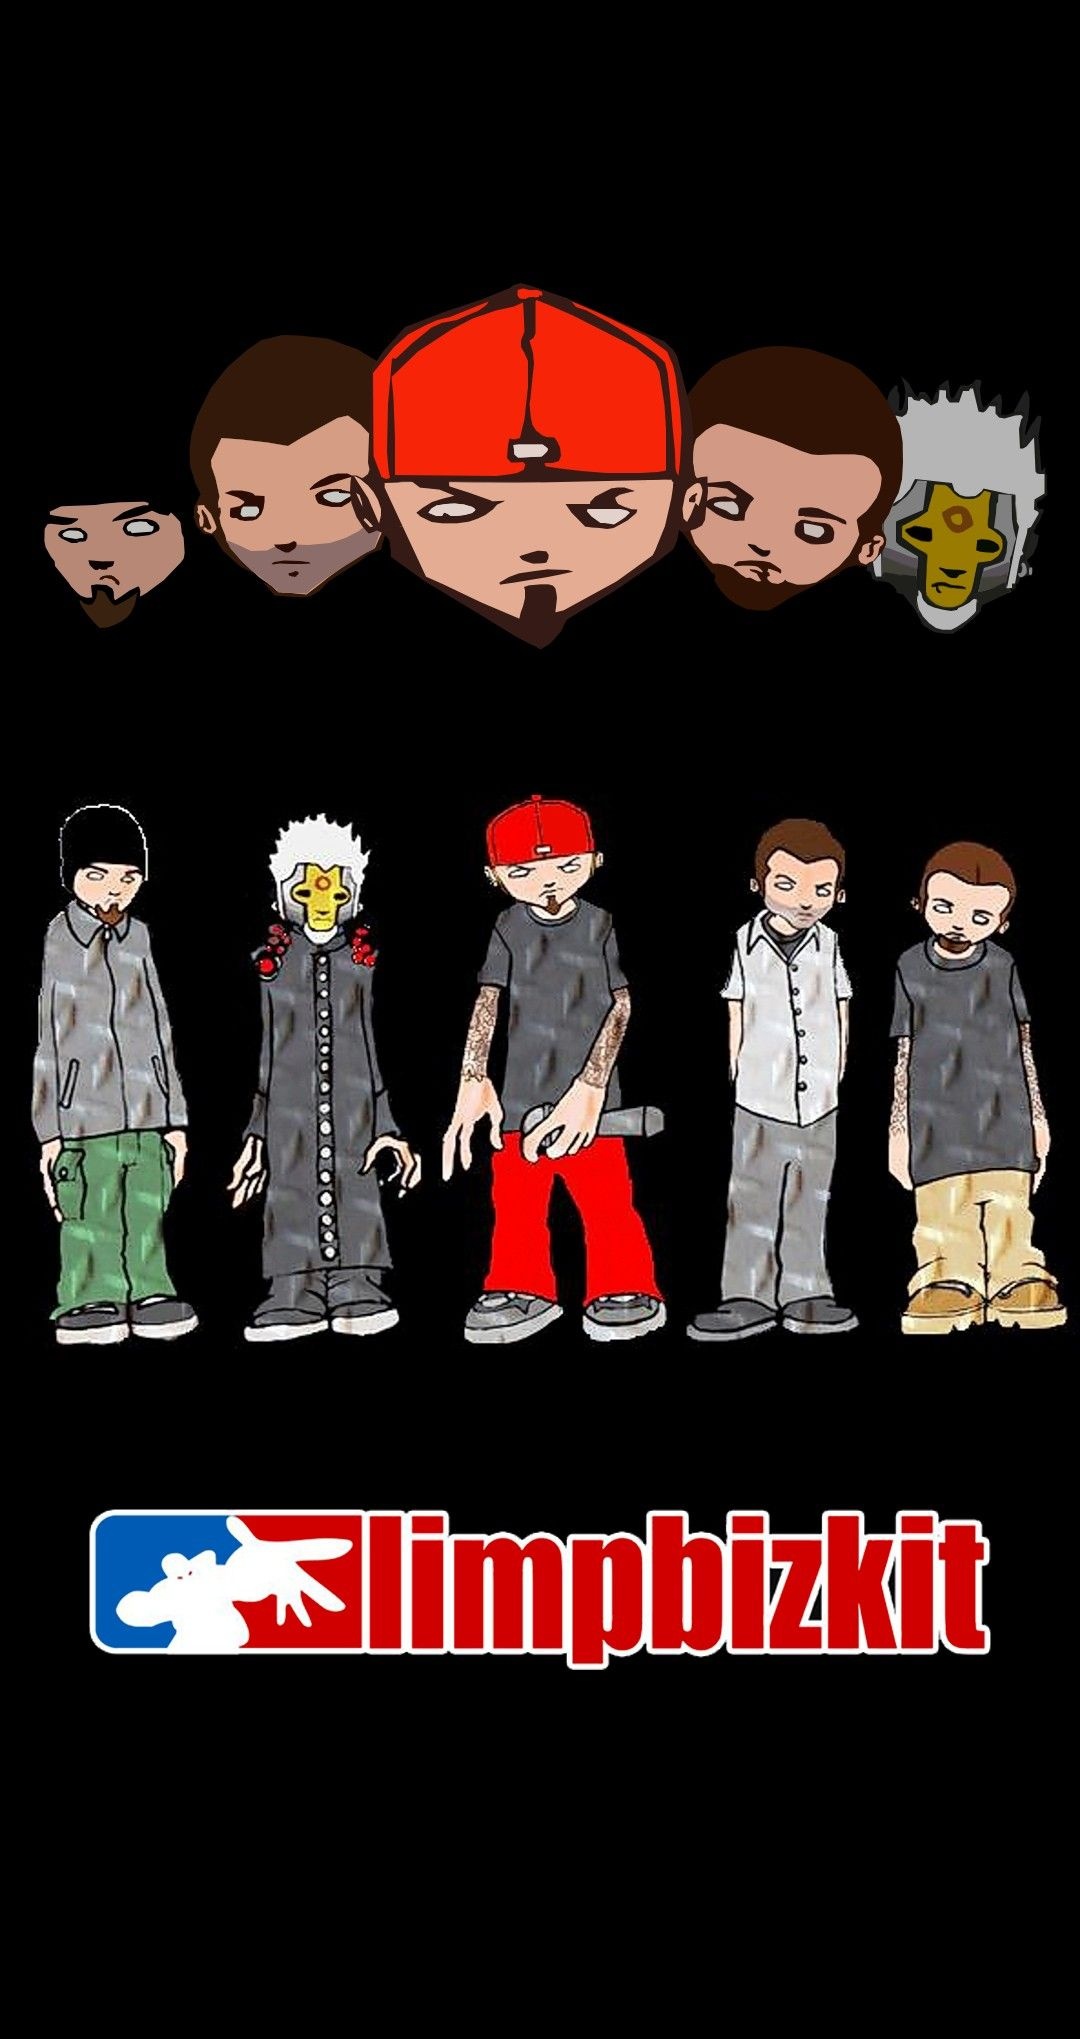 Limp Bizkit: The Fred Durst-fronted band, 26 singles, "My Generation". 1080x2040 HD Background.